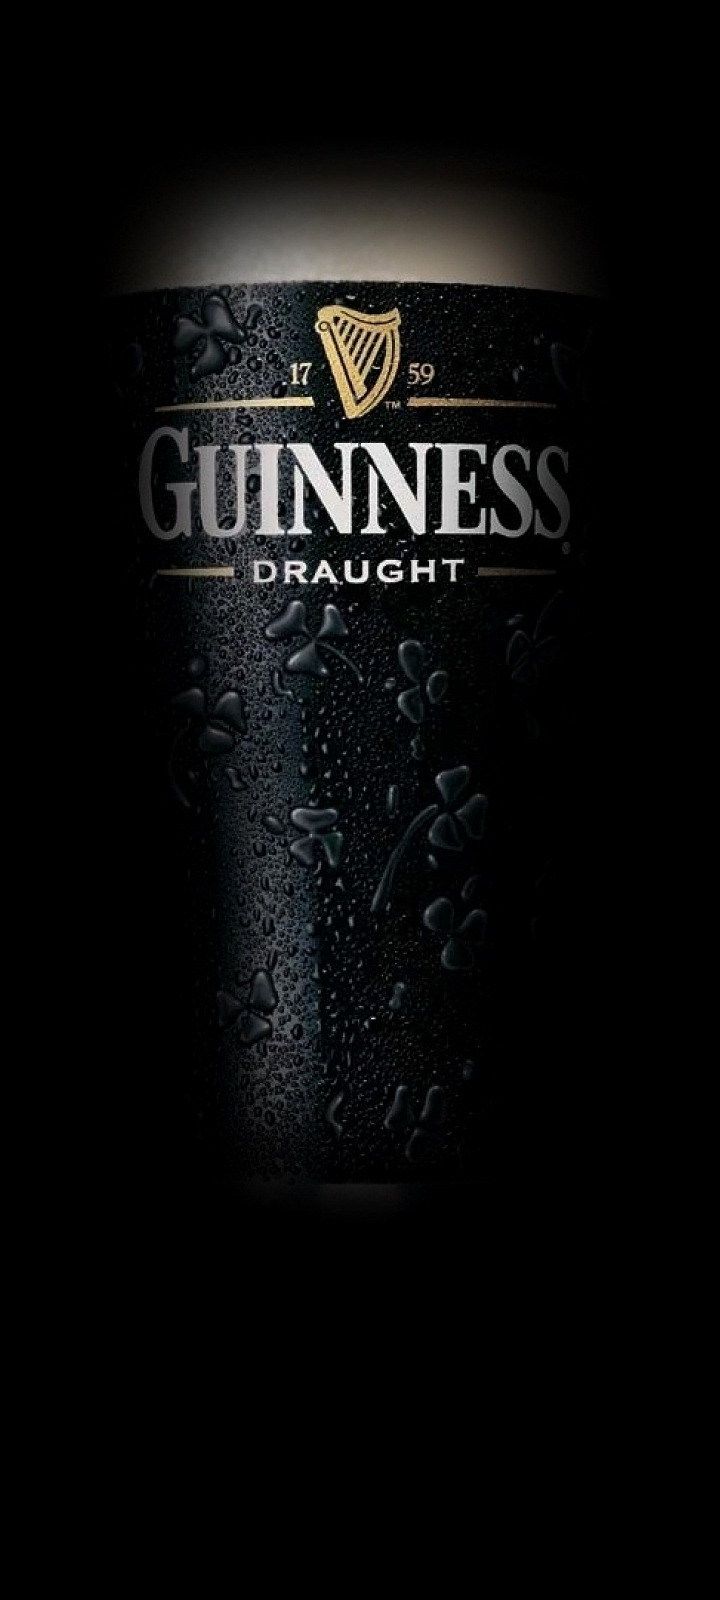 guinness, products, beer